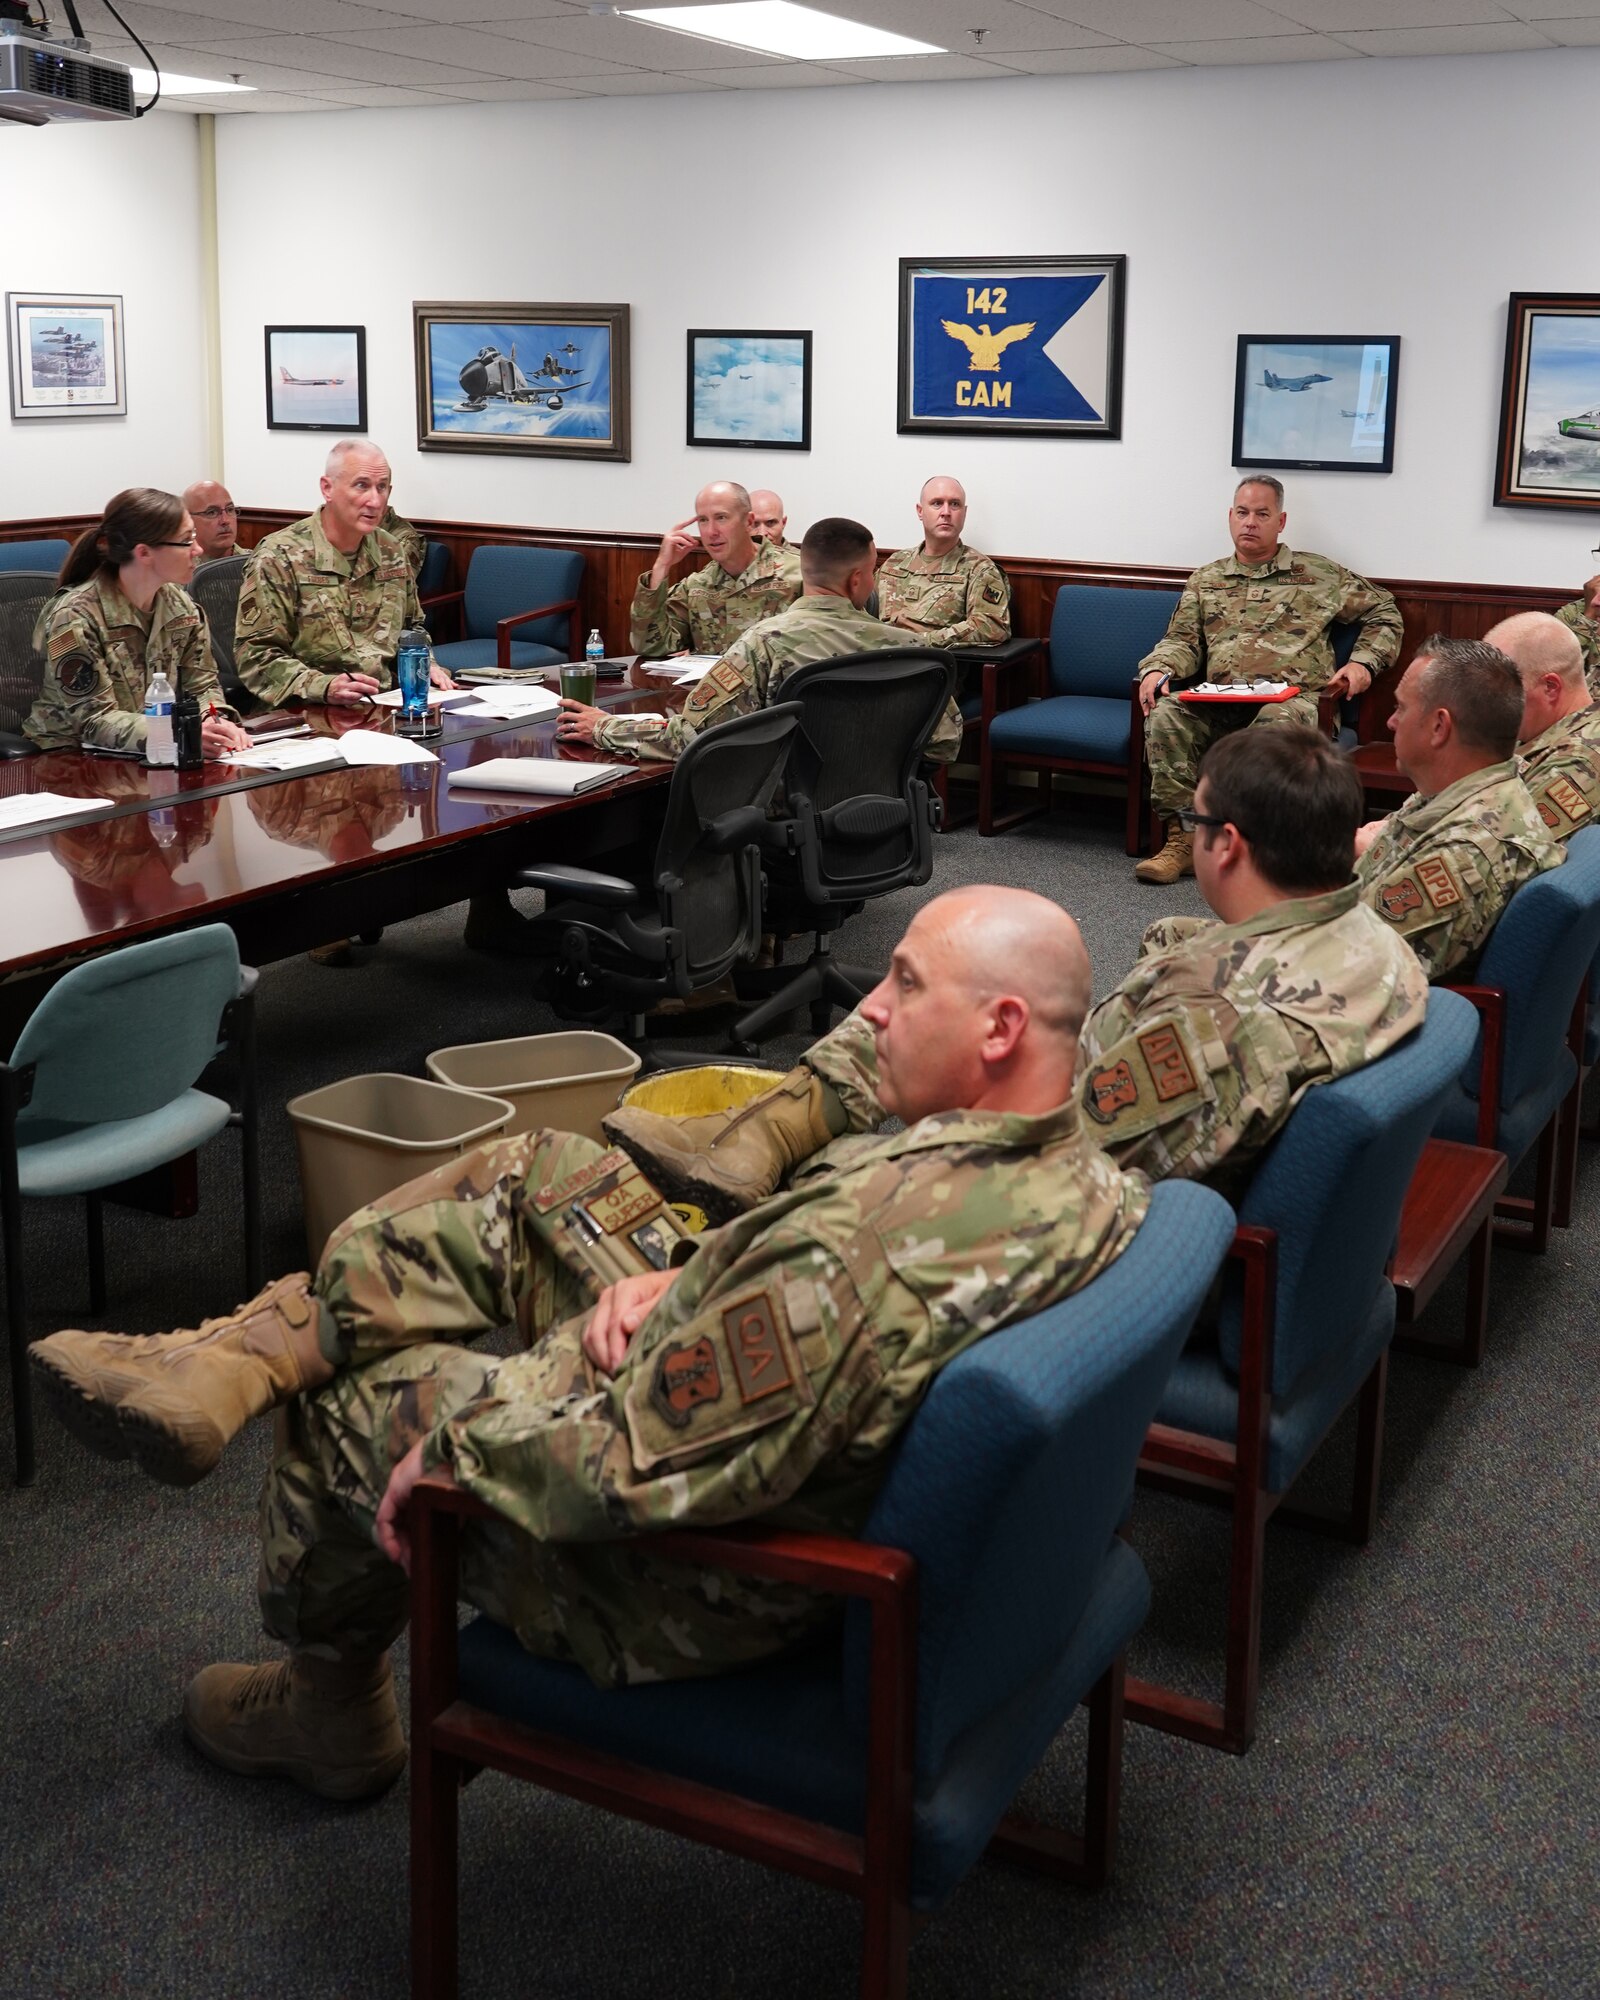 142nd Wing hosts ANG's Production Assessment Team